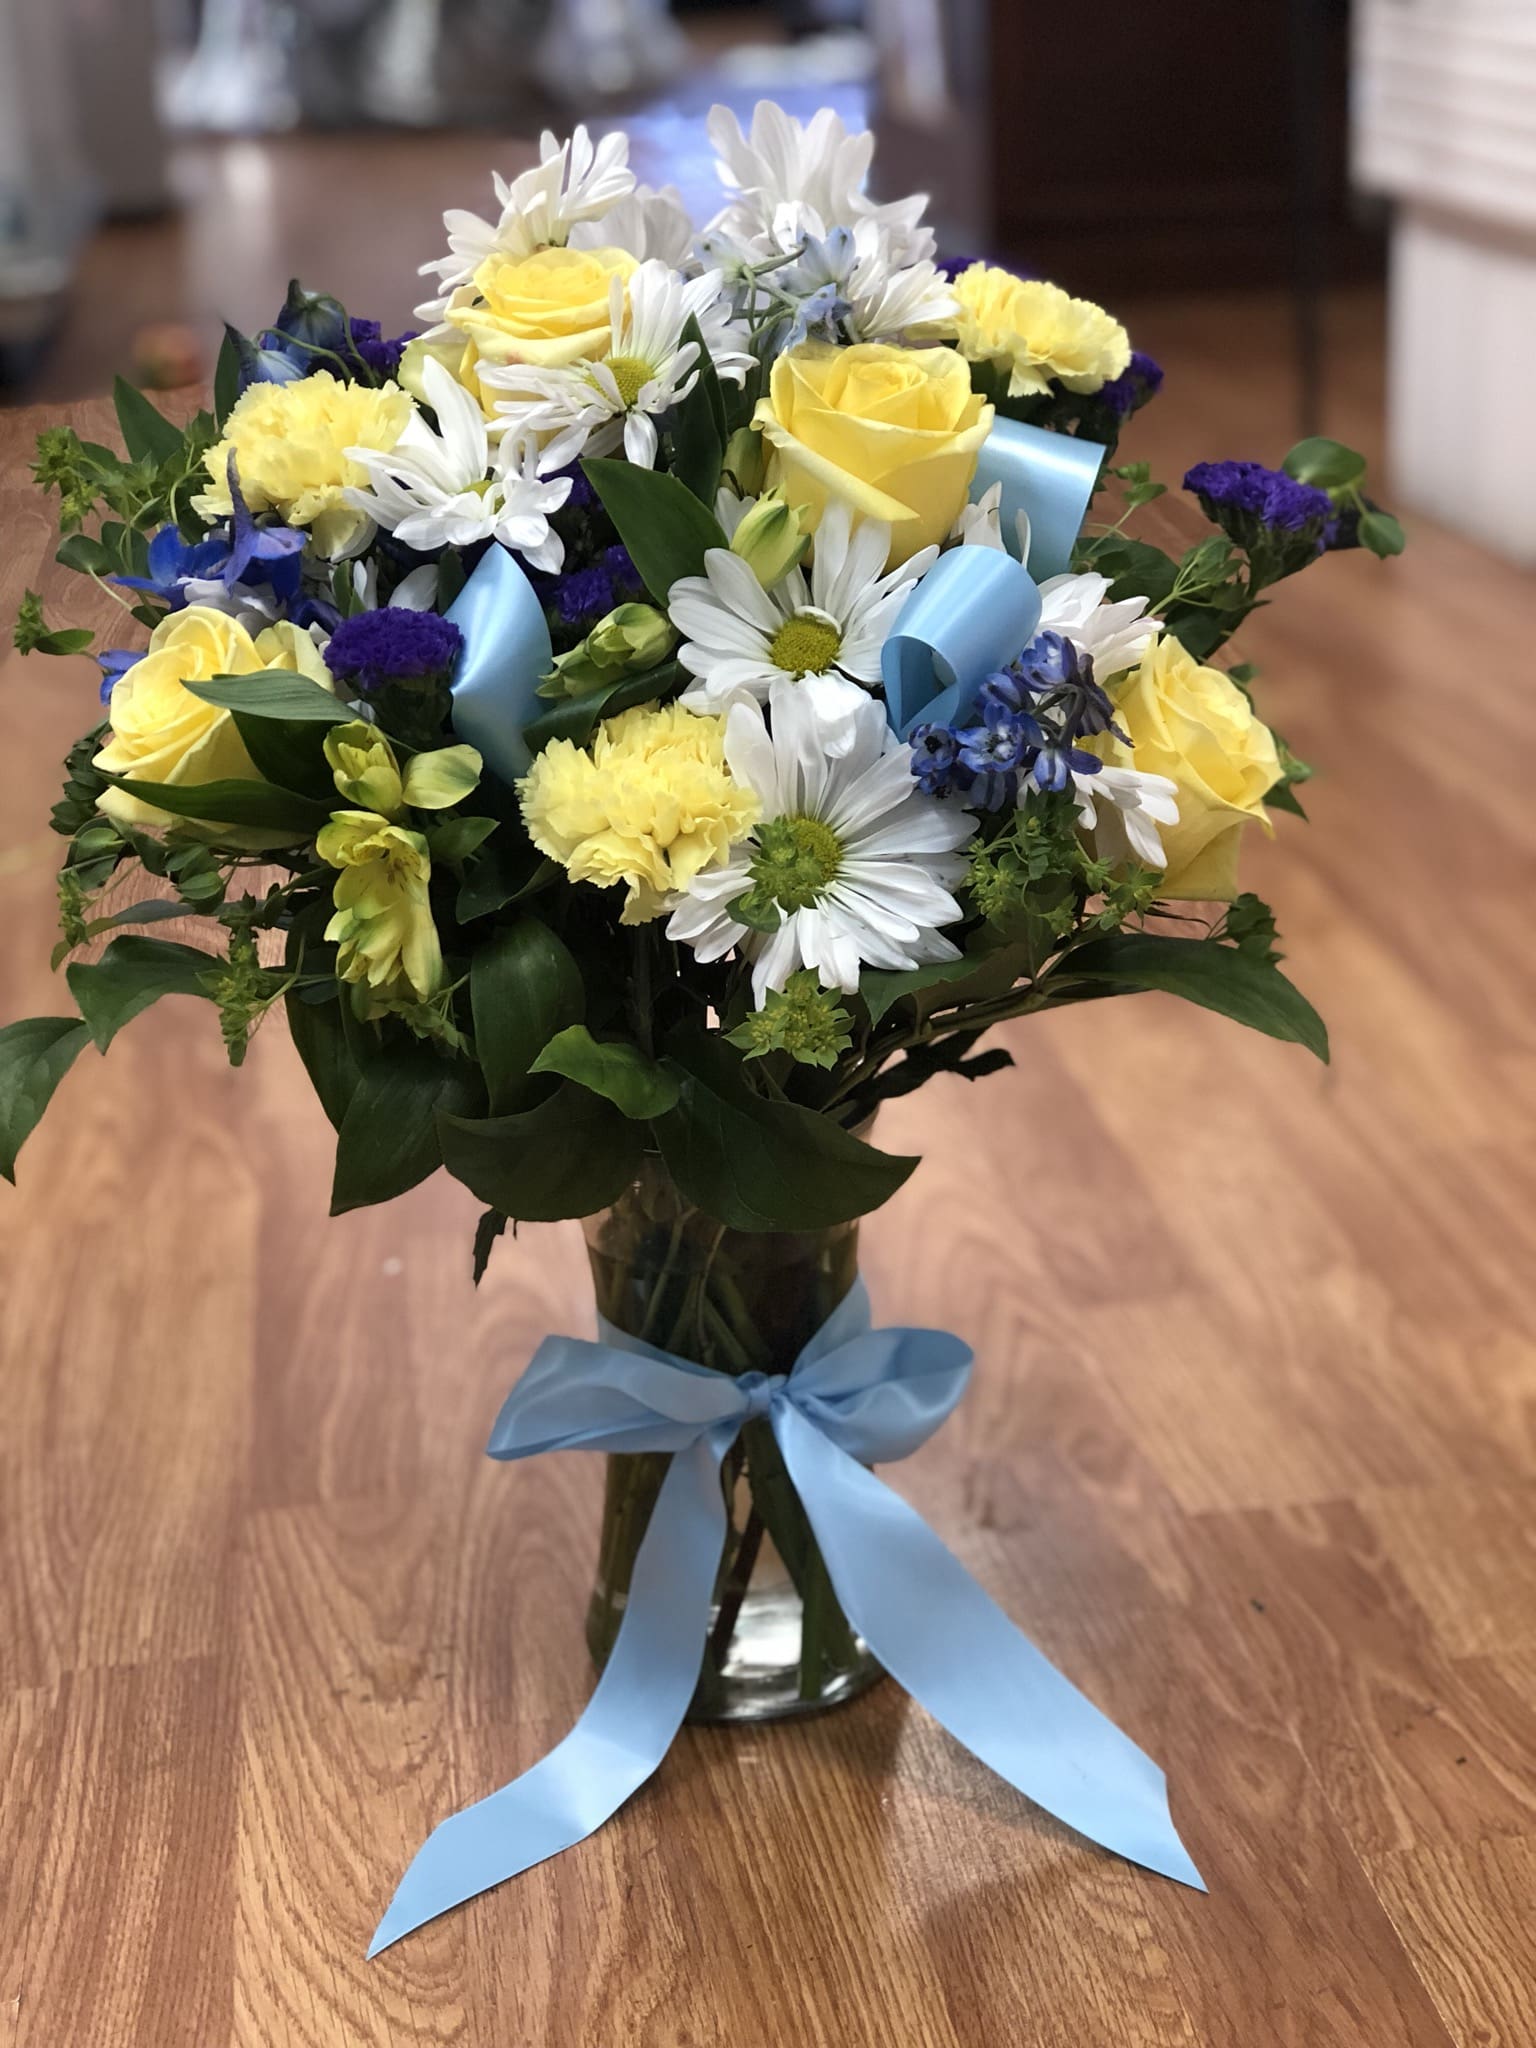 Yellow roses and white daysis blue dslfin and purple sratic by 